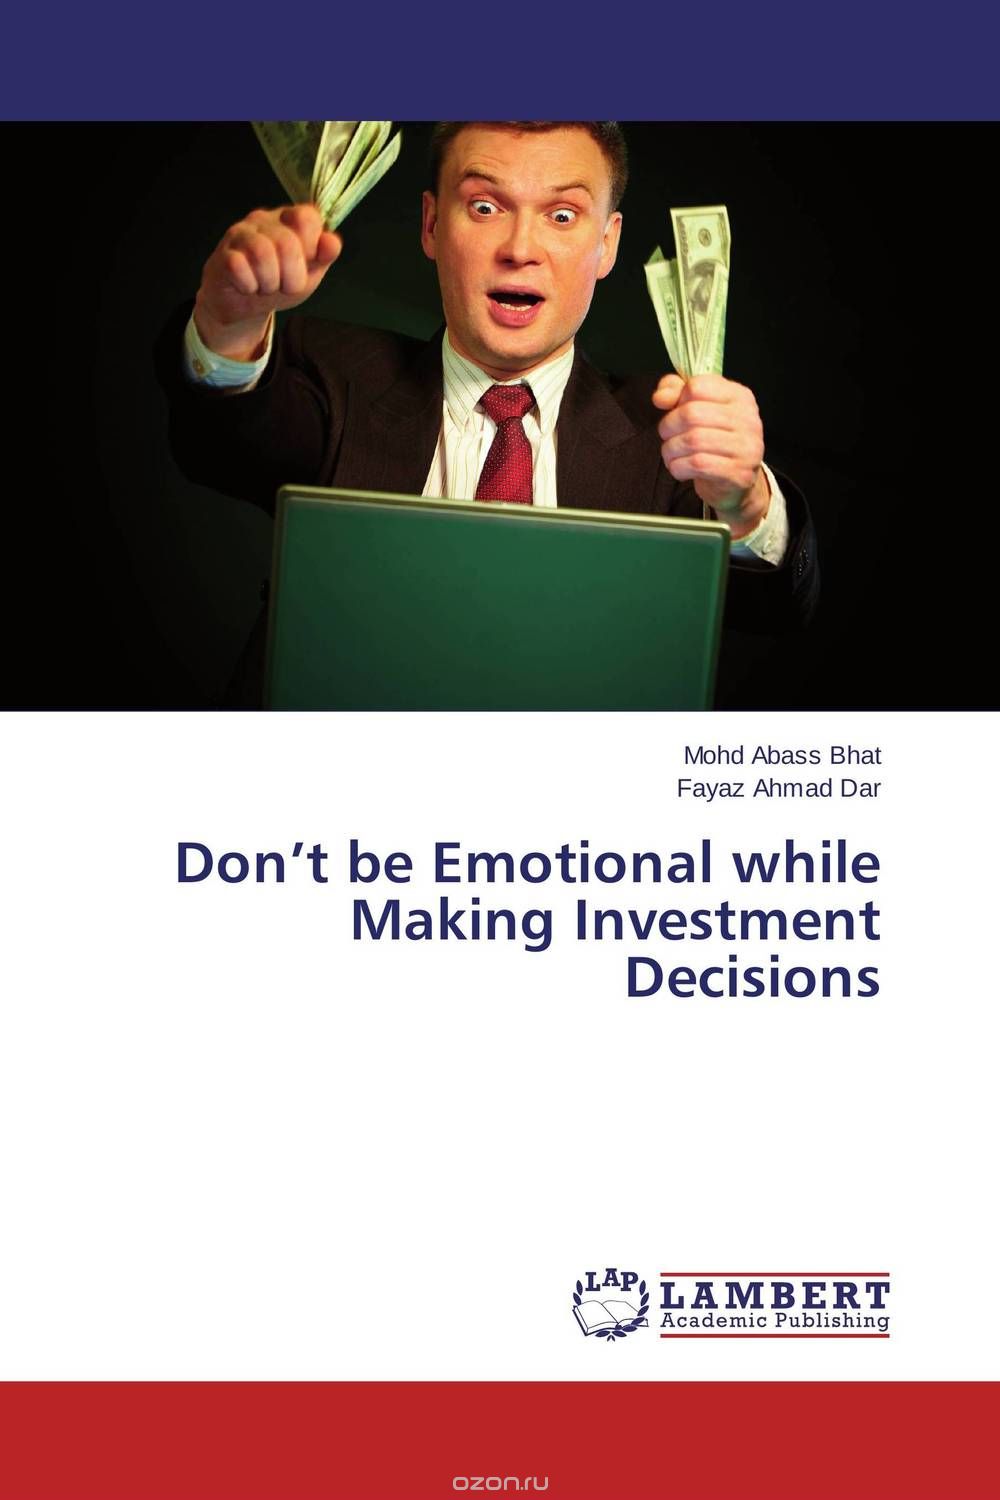 Don’t be Emotional while Making Investment Decisions